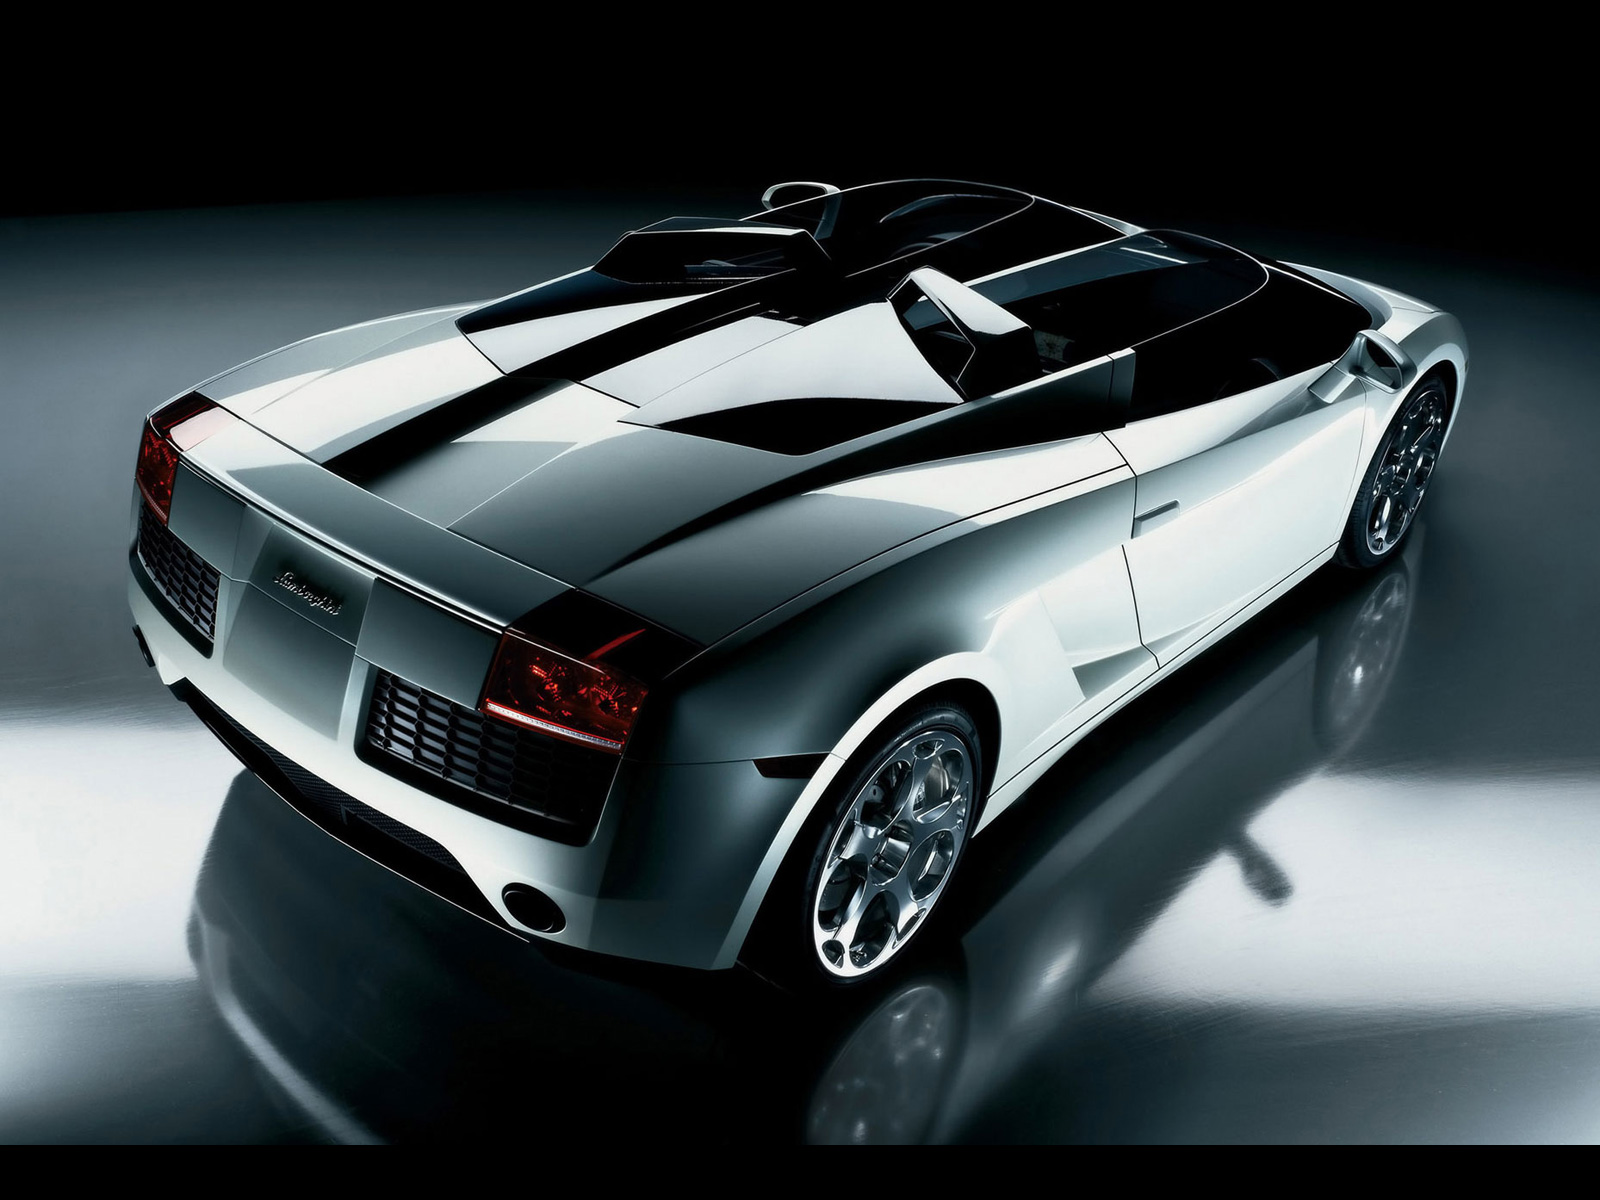 Top 100 Cars HQ Wallpapers 1600x1200 - Photo 6 of 100 phombo.com